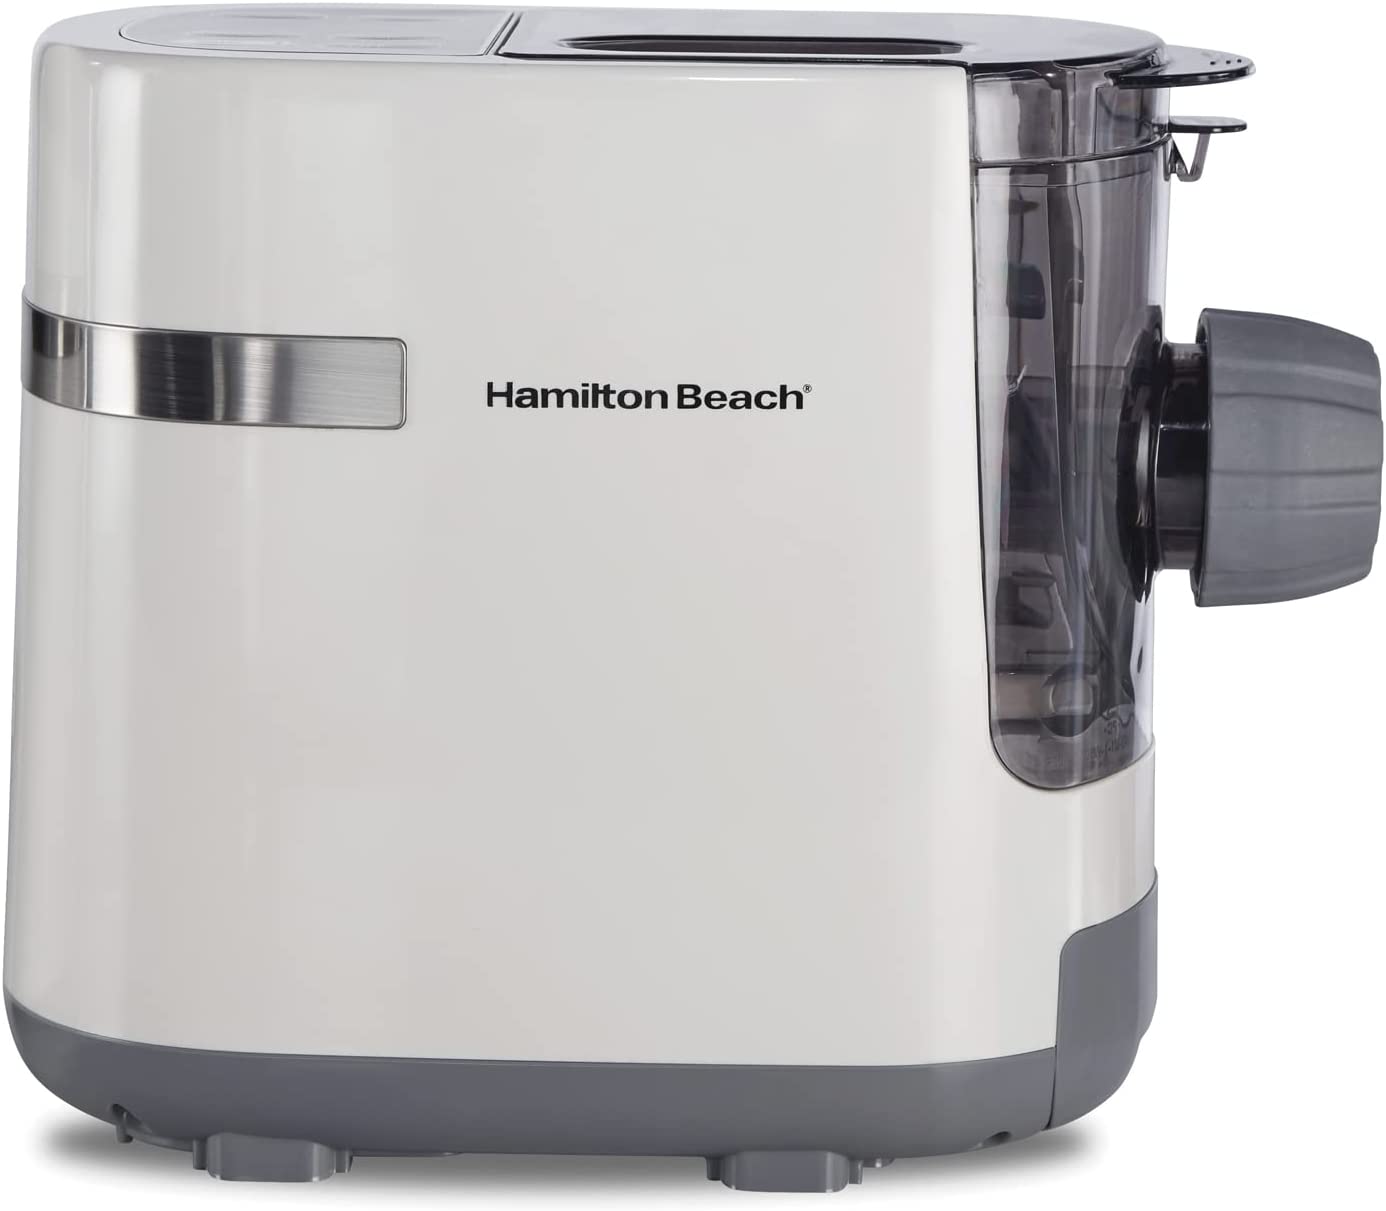 Review of Hamilton Beach Electric Pasta and Noodle Maker, Automatic,(86650)